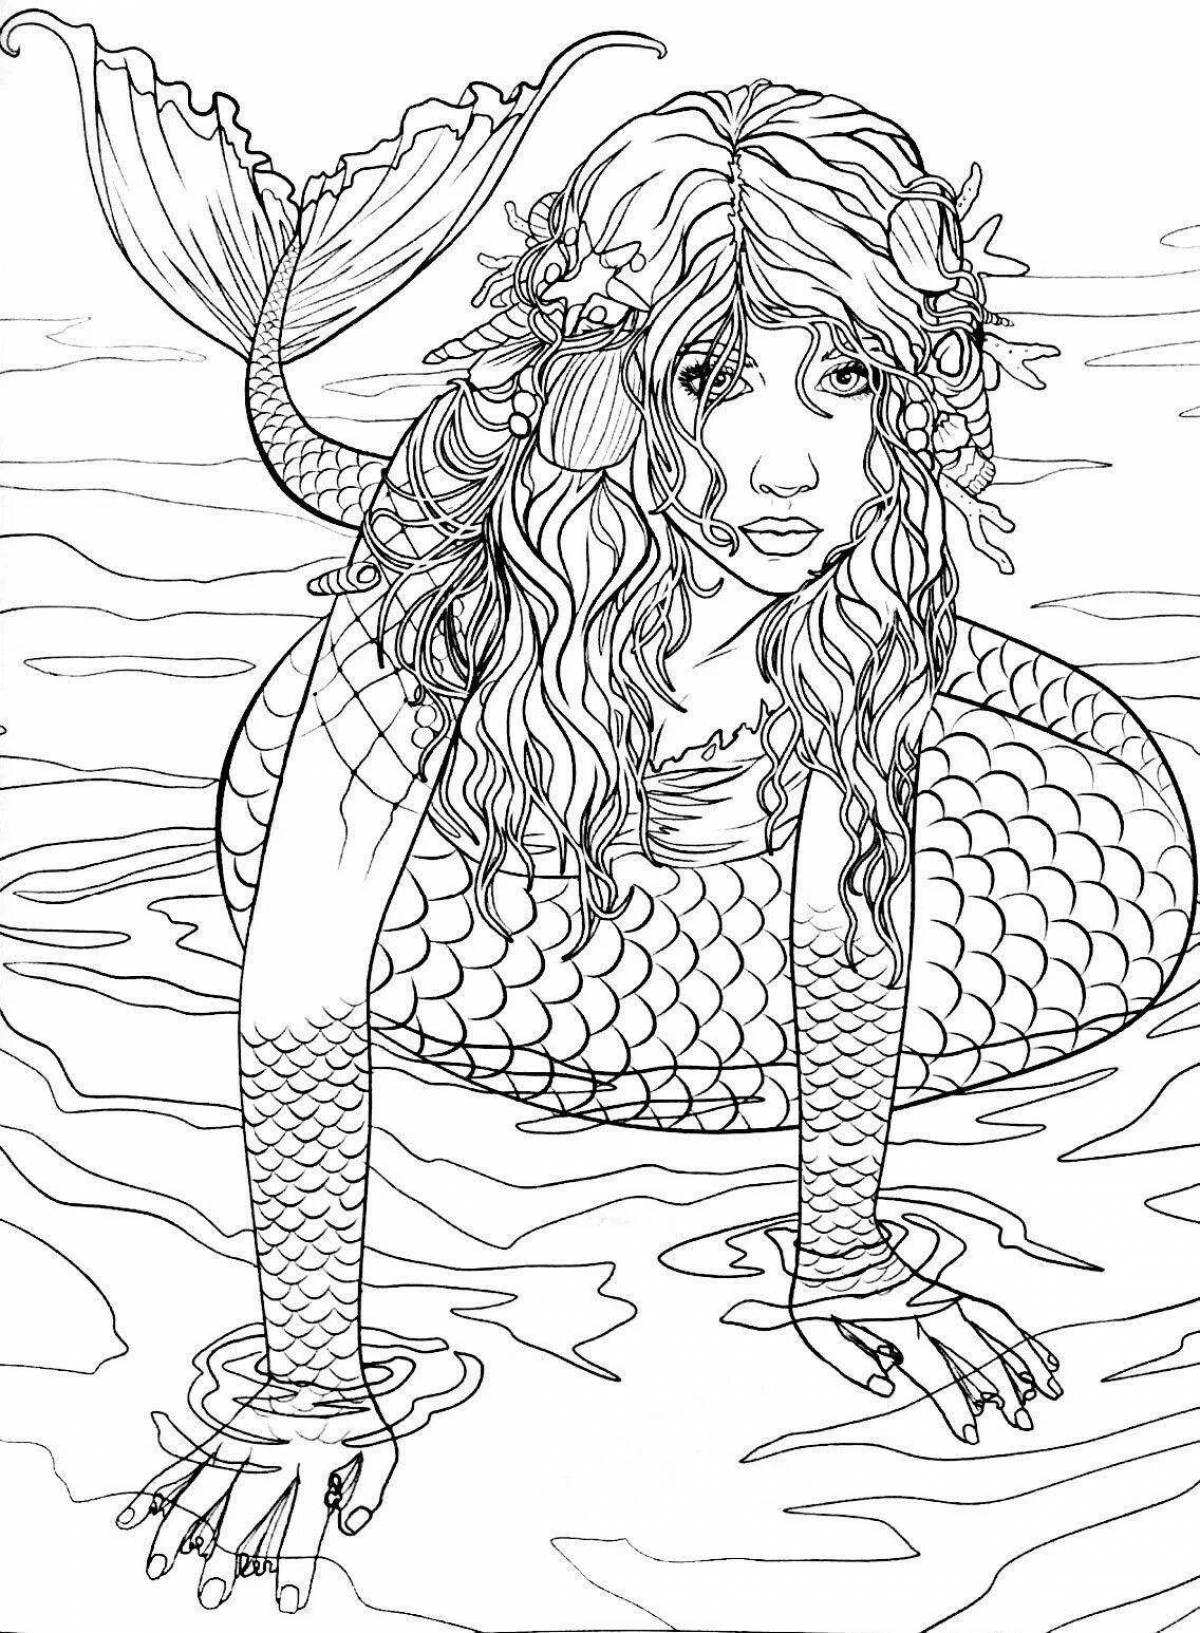 Irresistible witch coloring pages from Slavic myths